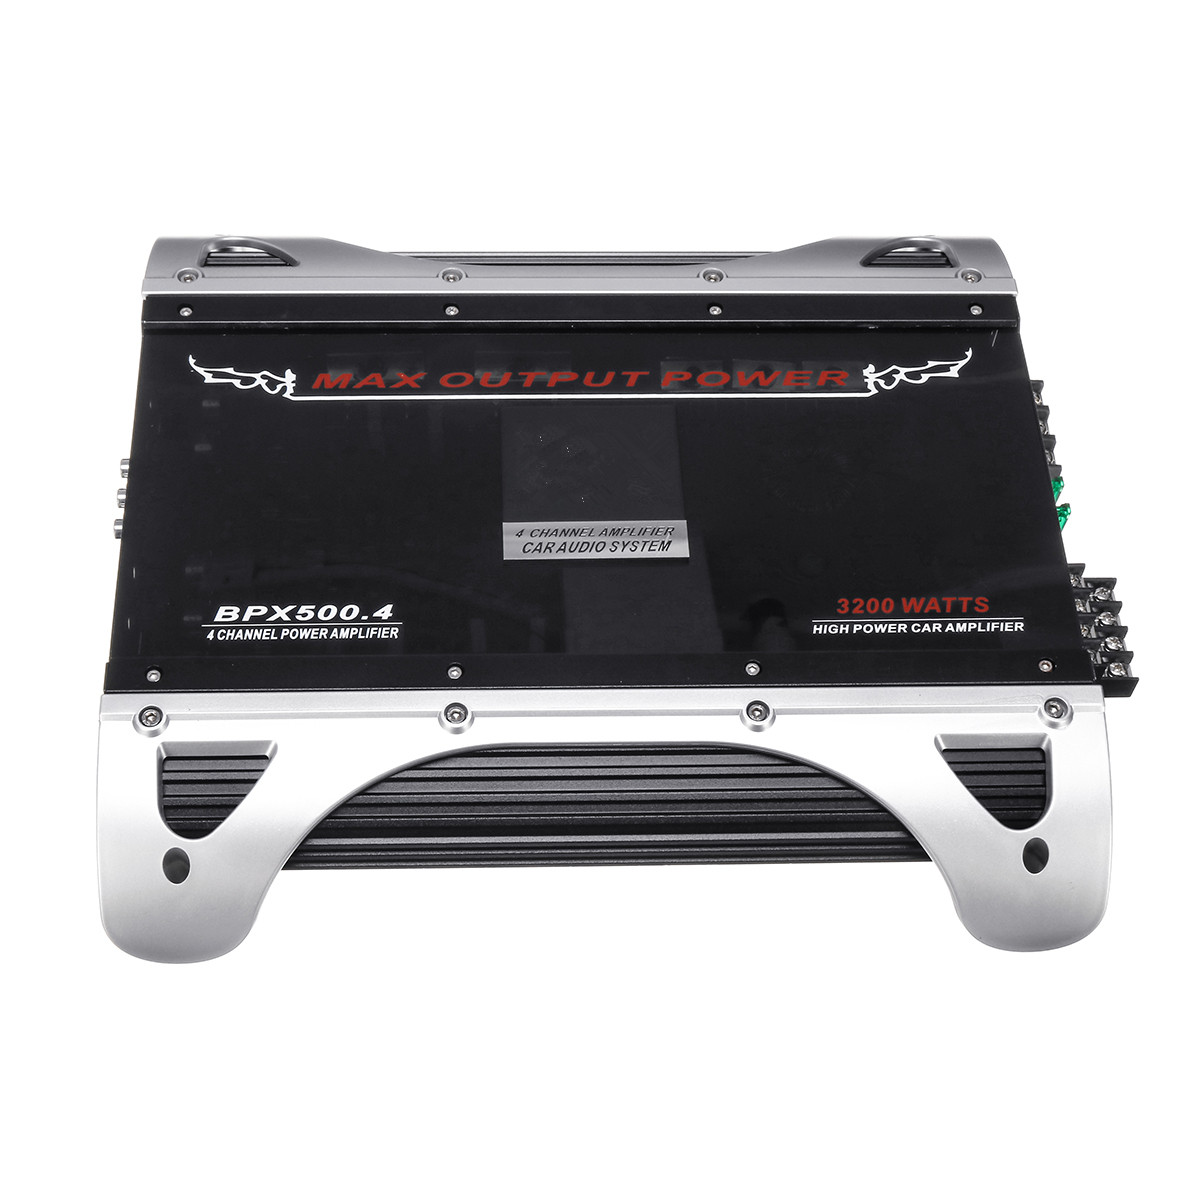 3200W 12V 4 Channel Car Amplifier Audio Stereo Bass Speaker 4 Way High Power Vehicle Car Audio Power Amplifier Subwoofer